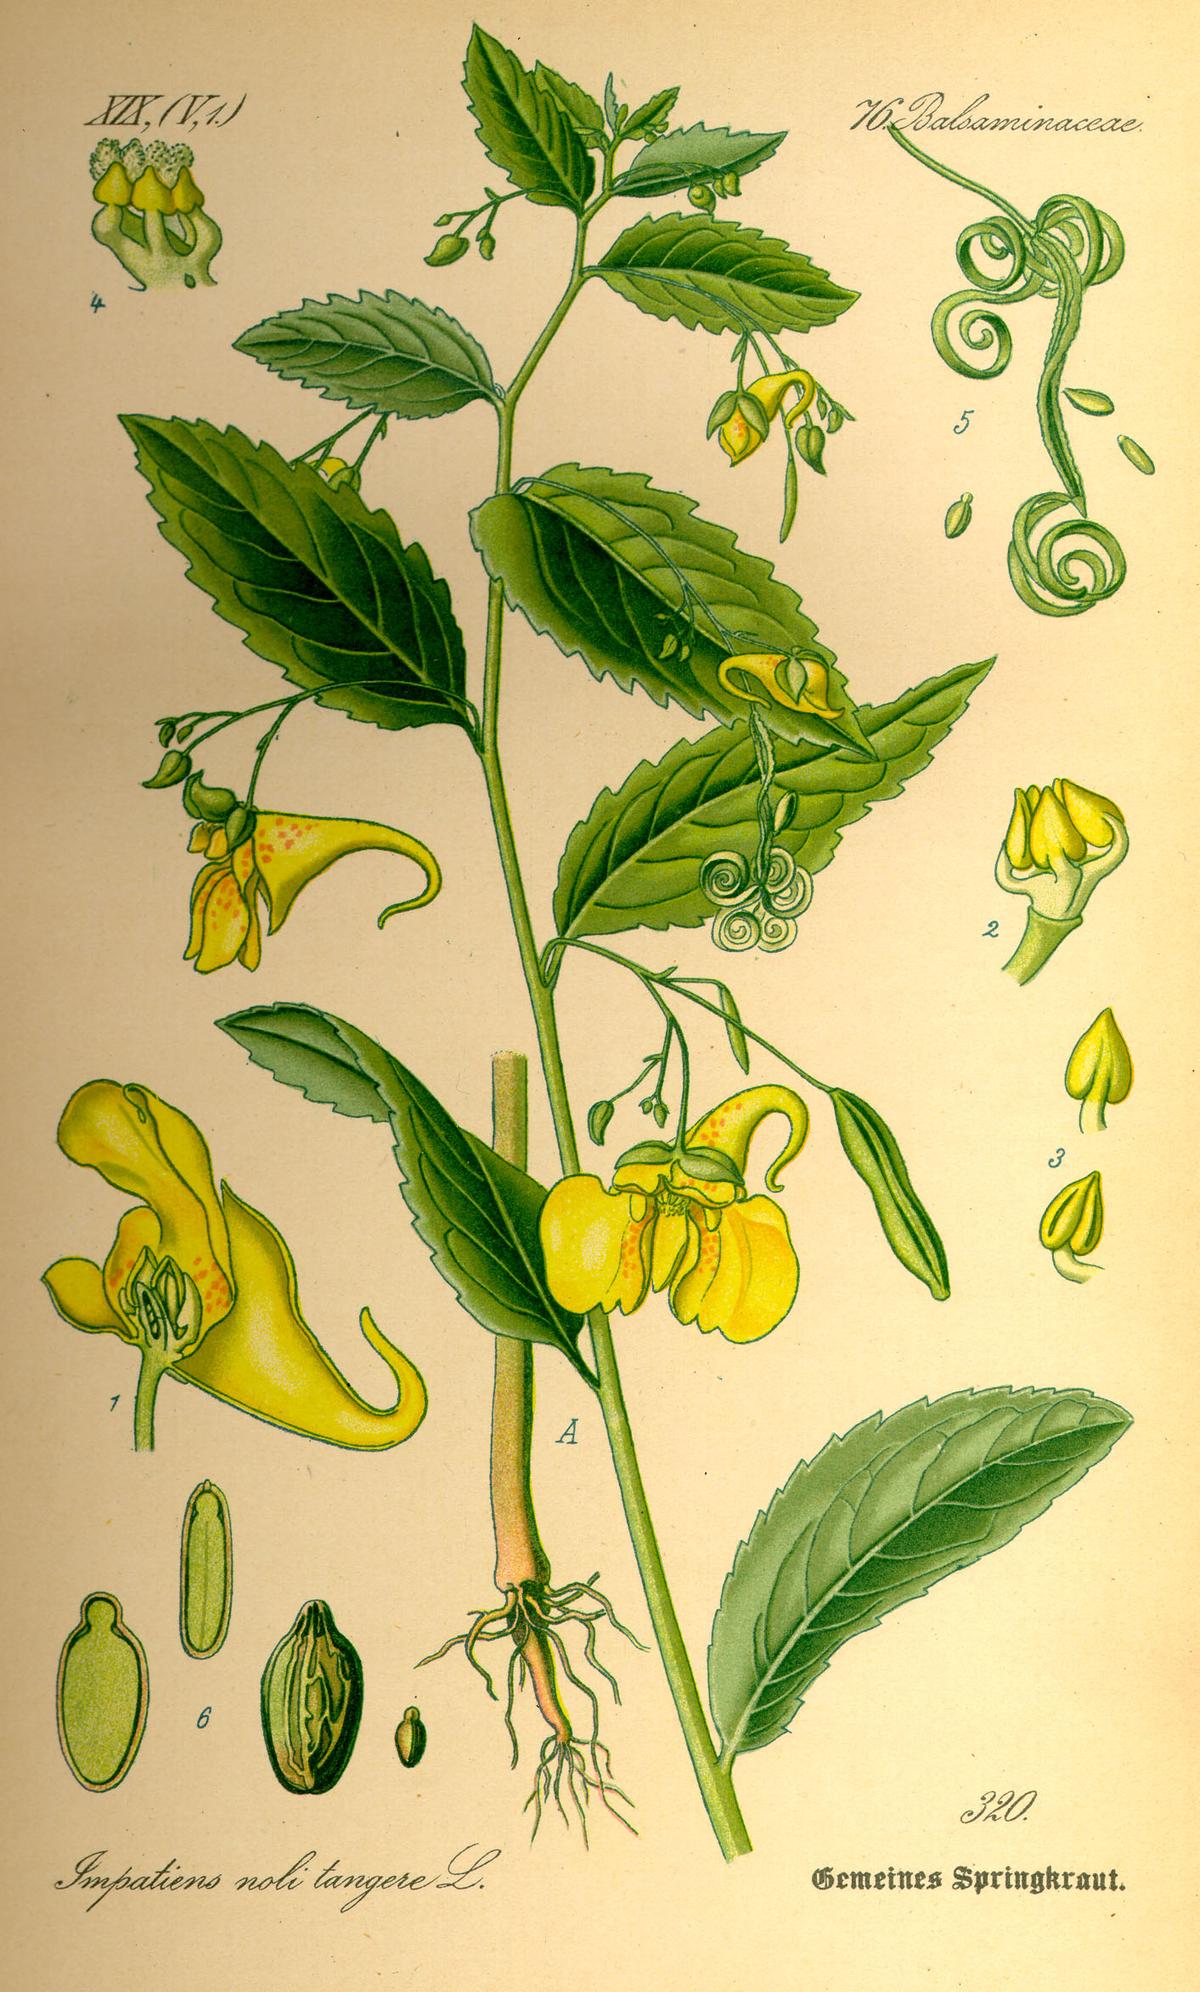 Jewelweed illustration by Otto Wilhelm Thomé, 1885 (Public domain)